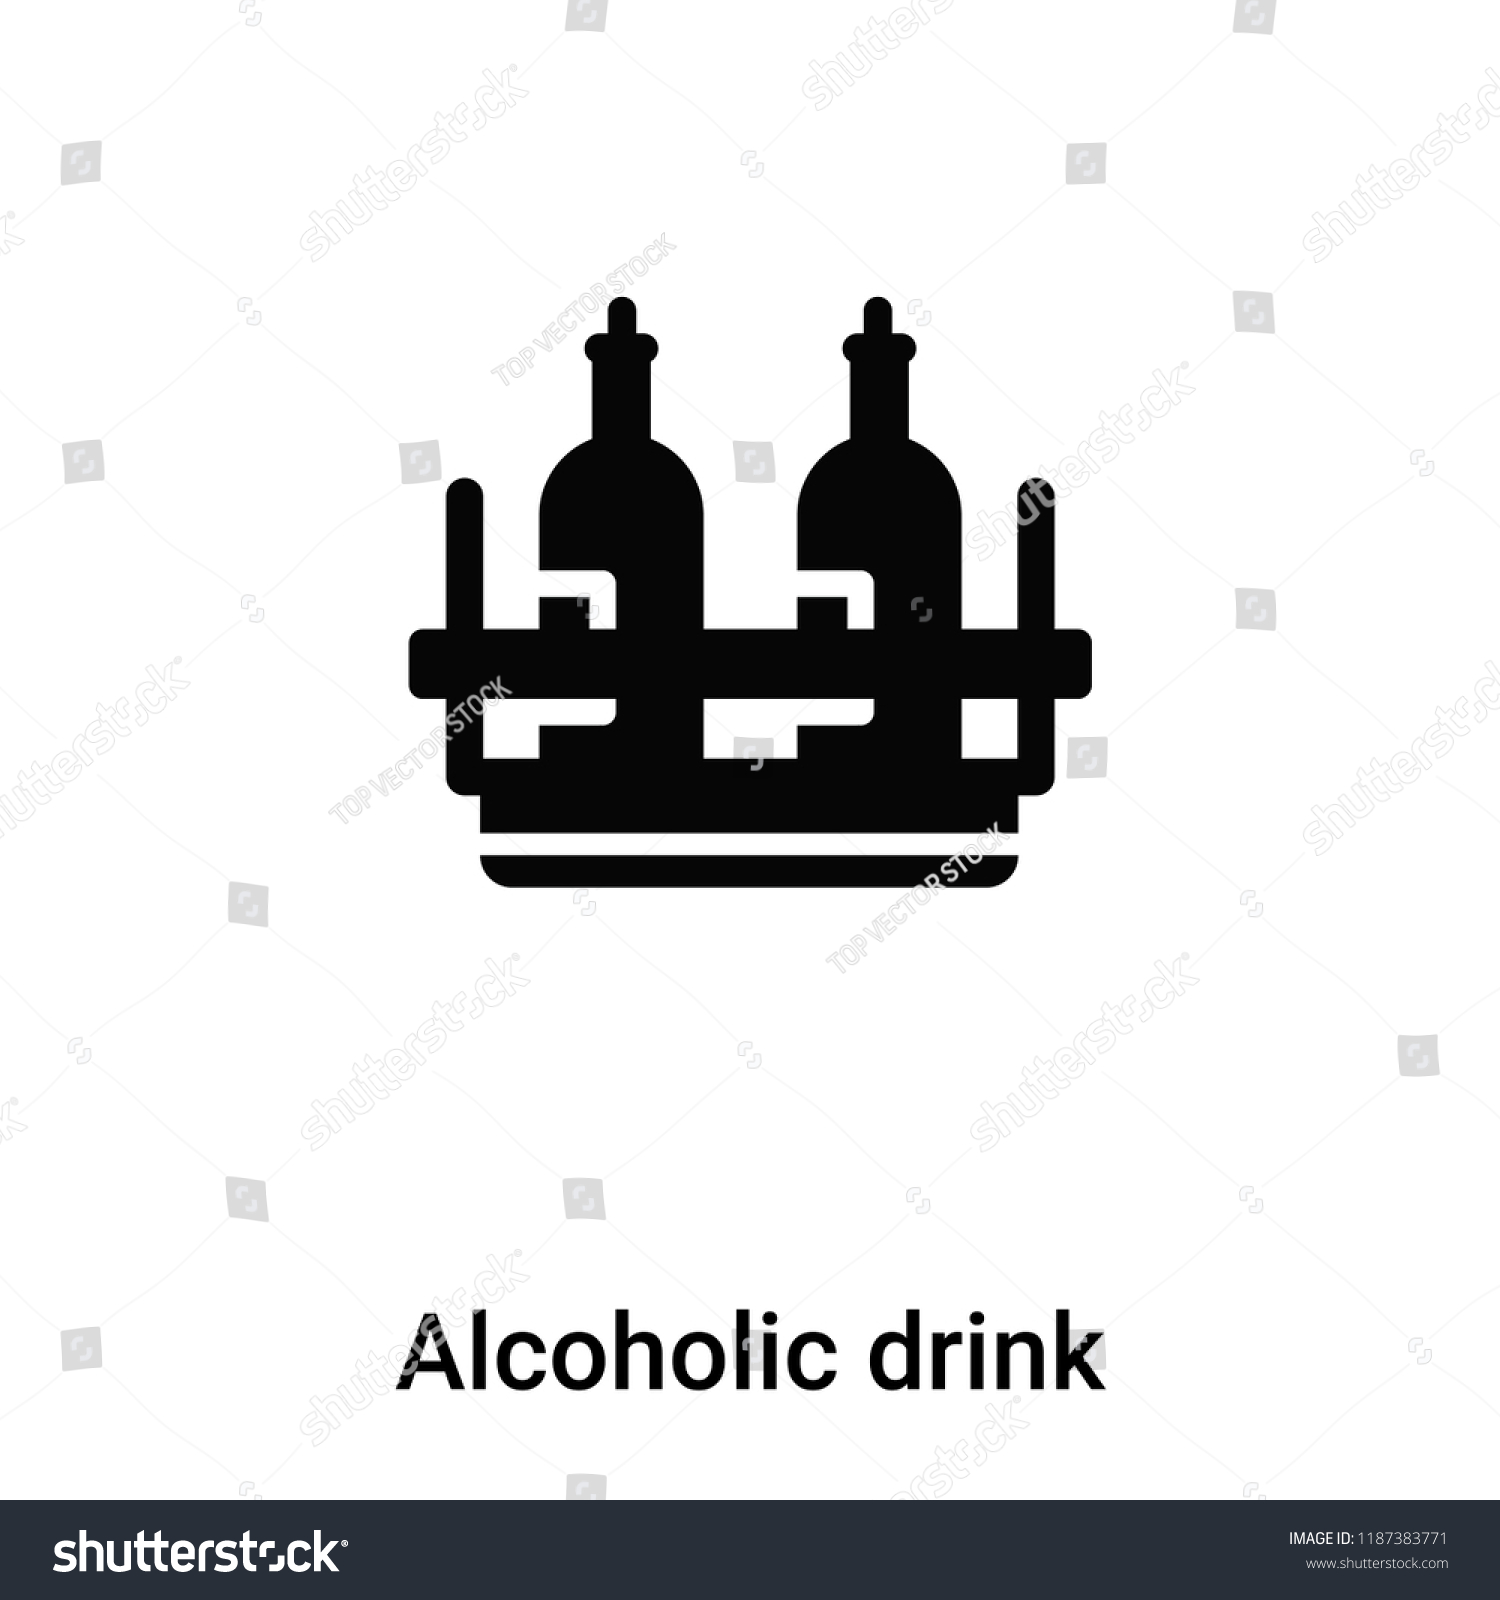 SVG of Alcoholic drink icon vector isolated on white background, logo concept of Alcoholic drink sign on transparent background, filled black symbol svg